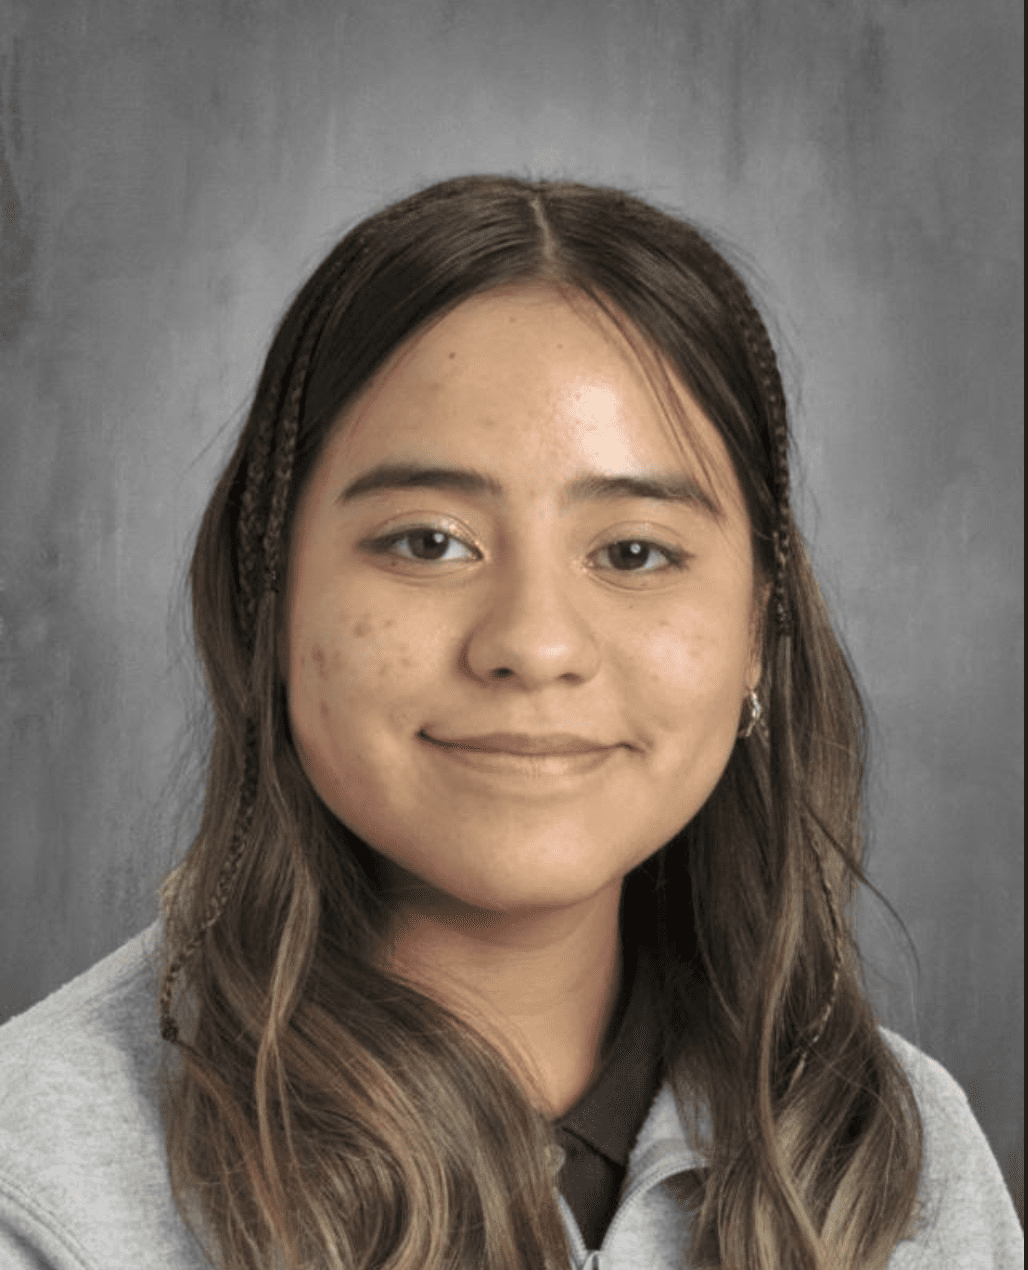 This photo is a headshot of Sandy Lopez, a student at Rowe-Clark Math & Science Academy. She is a young Latine woman with long wavy hair. In this photo, she is smiling and wearing a gray jacket over a black polo shirt.